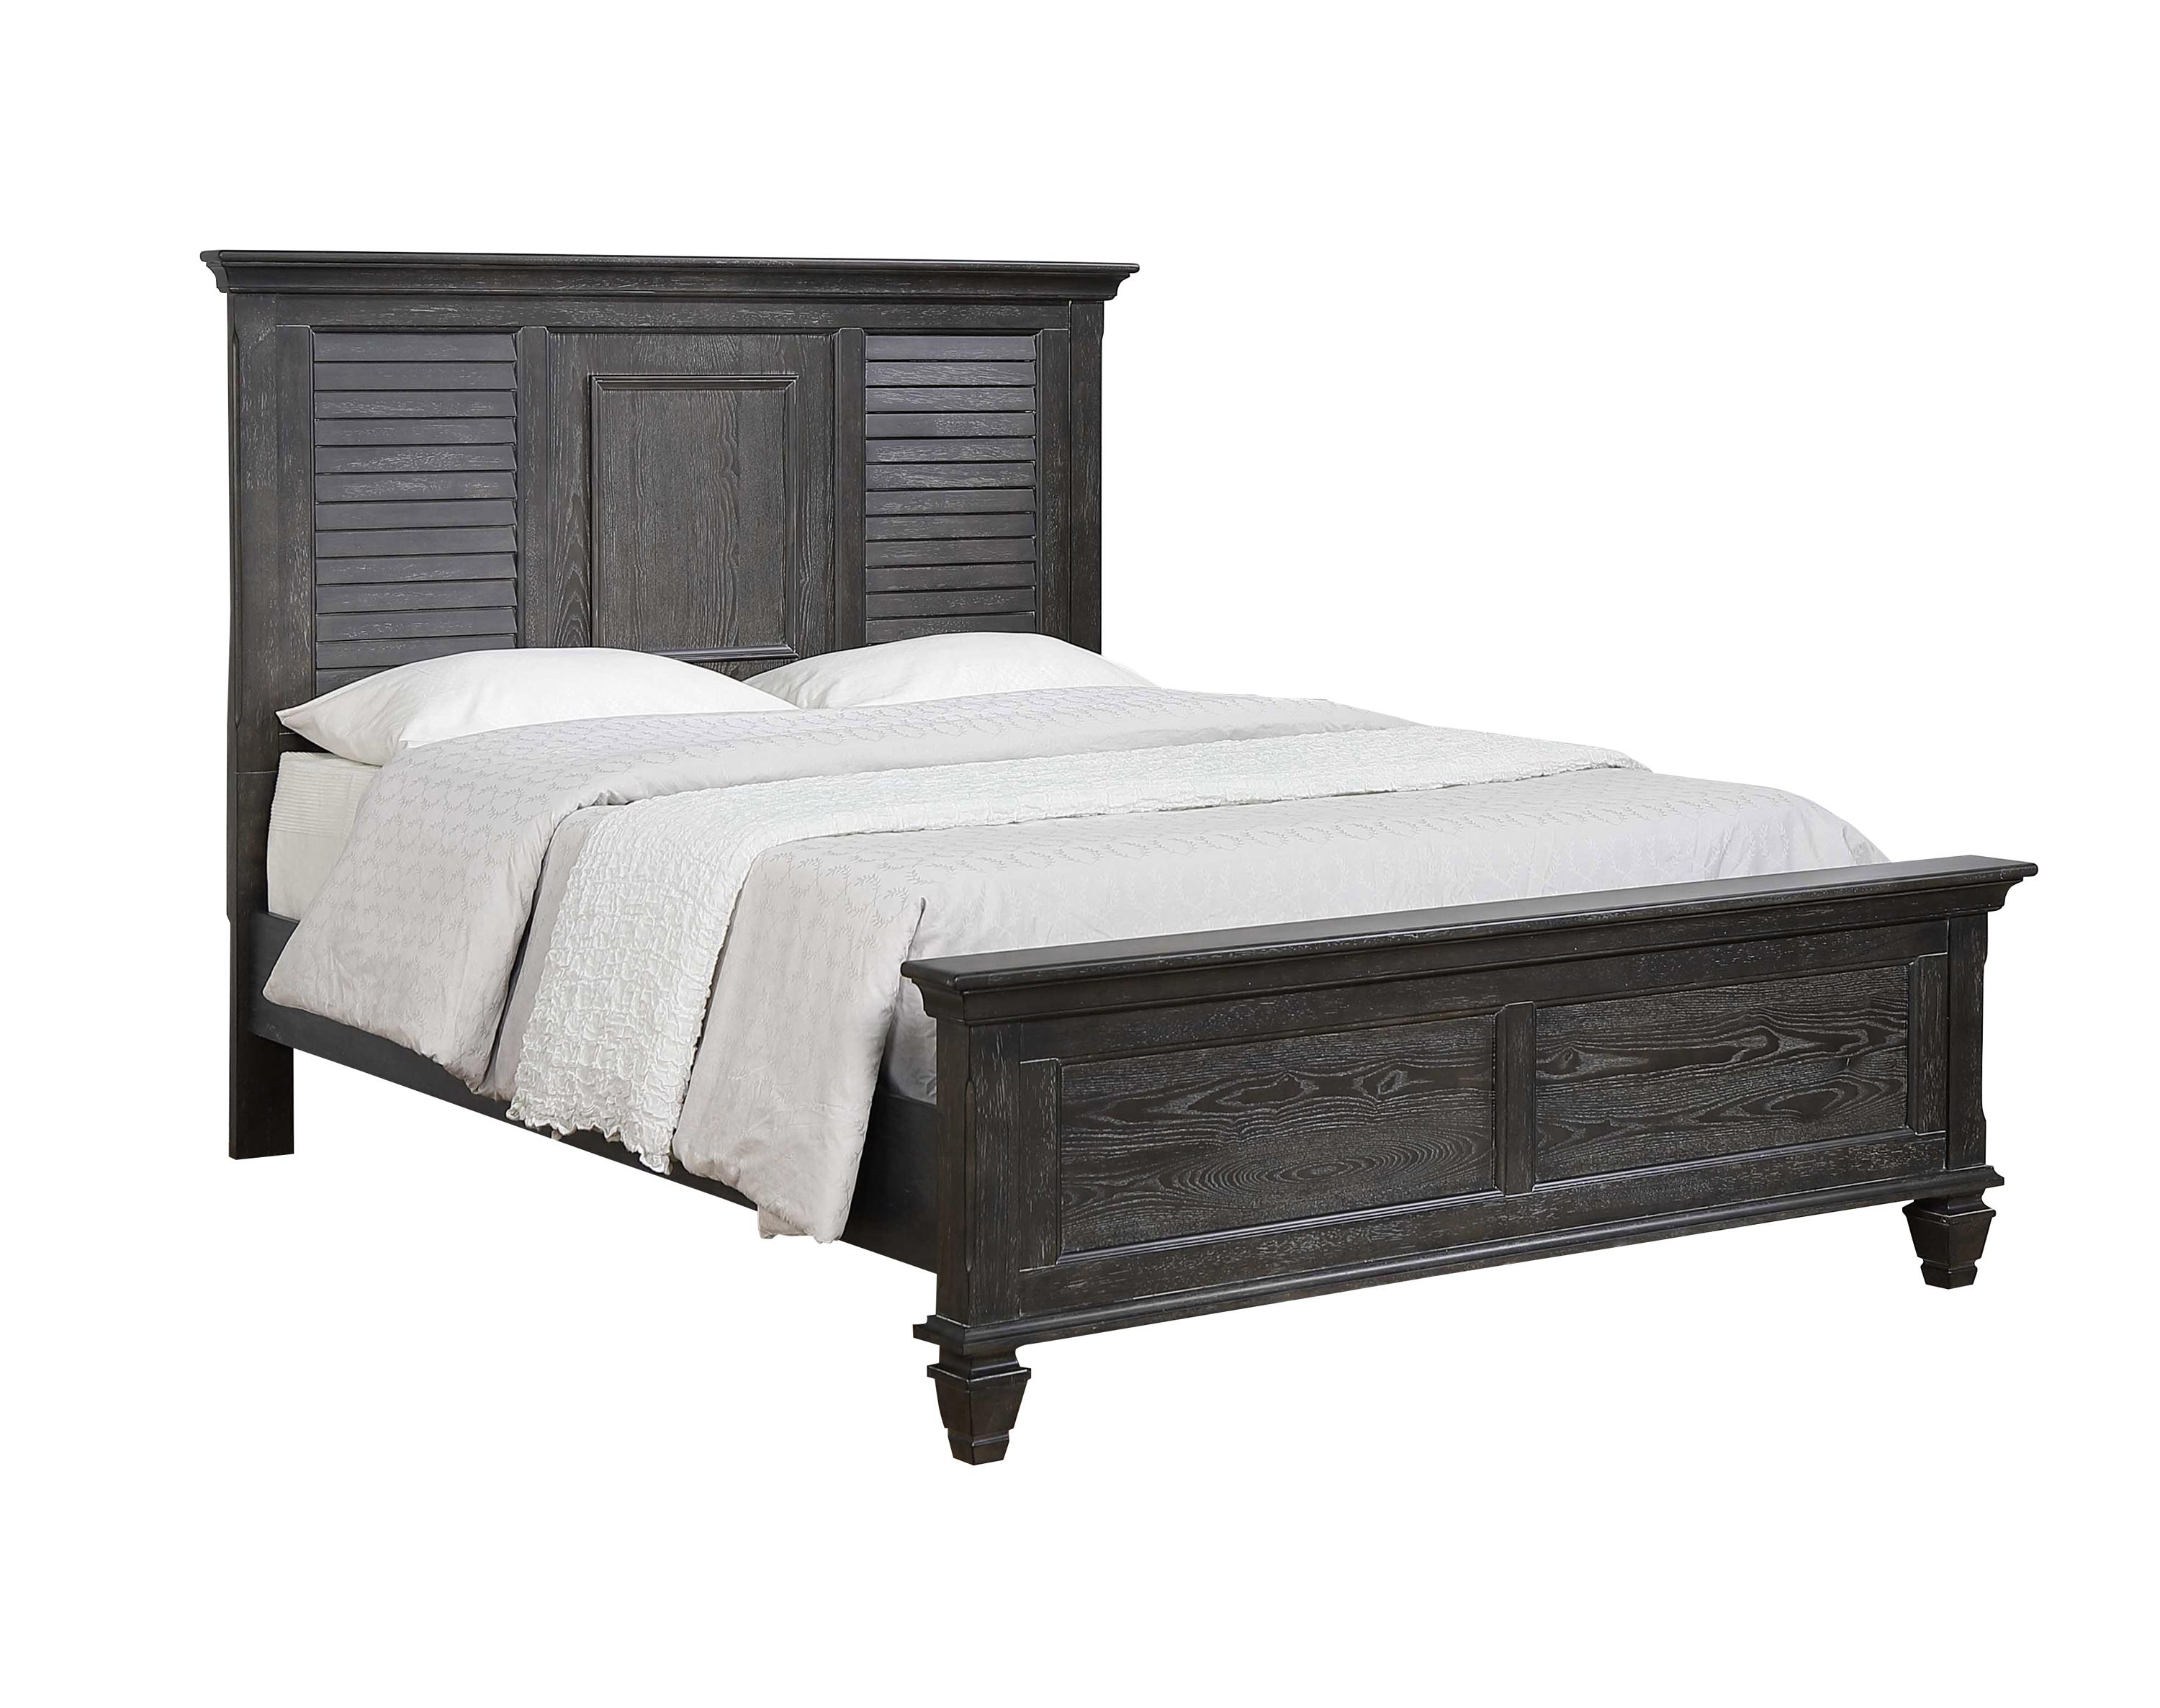 Transitional Bed 205731Q Franco 205731Q in Sage 